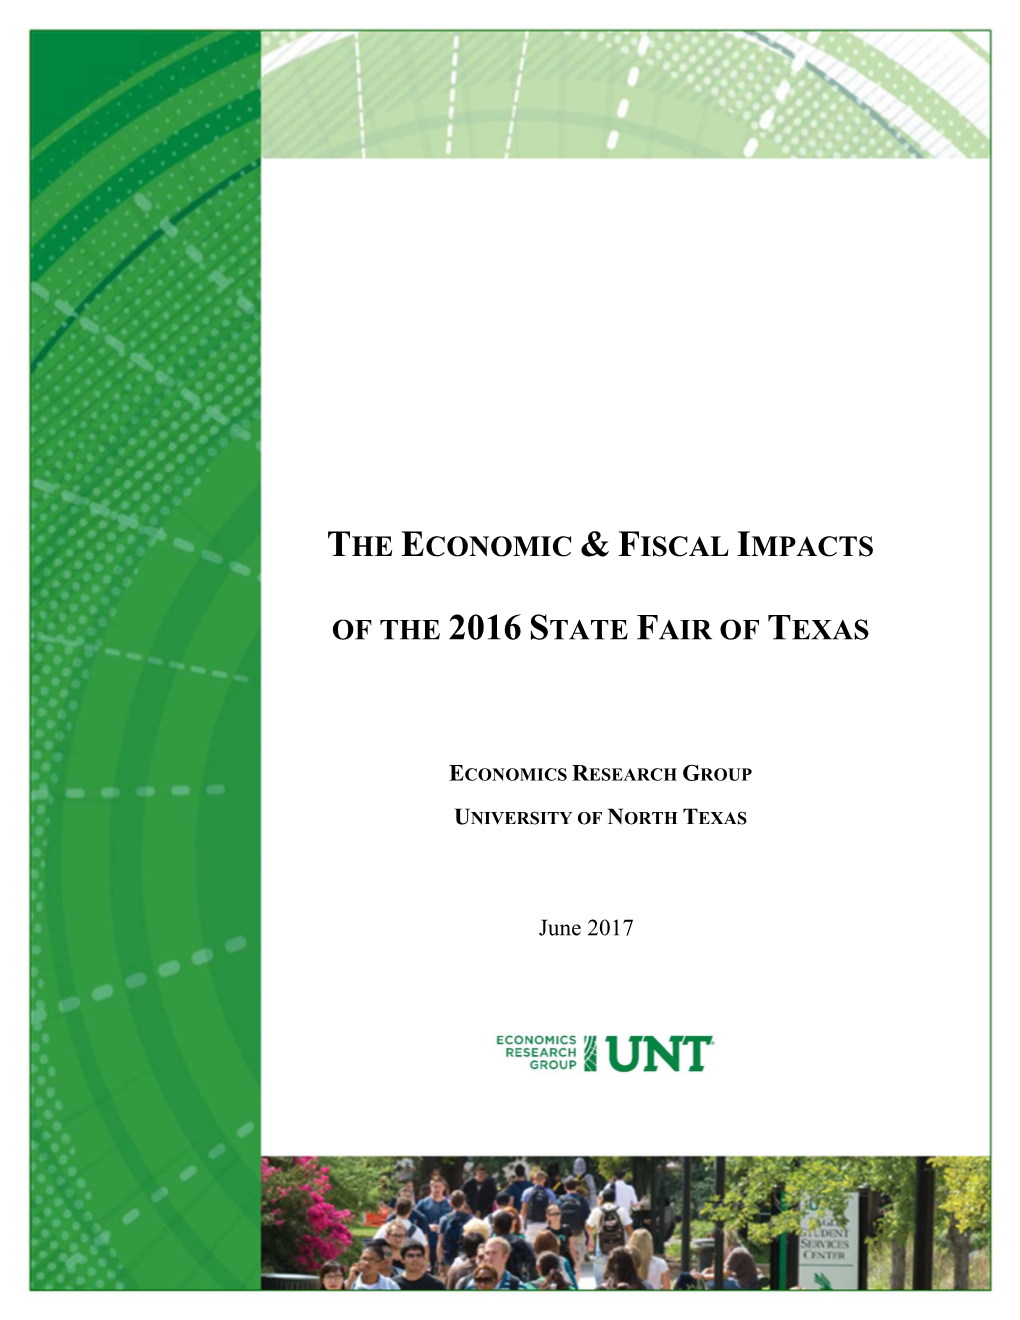 The Economic & Fiscal Impacts of the 2016 State Fair of Texas